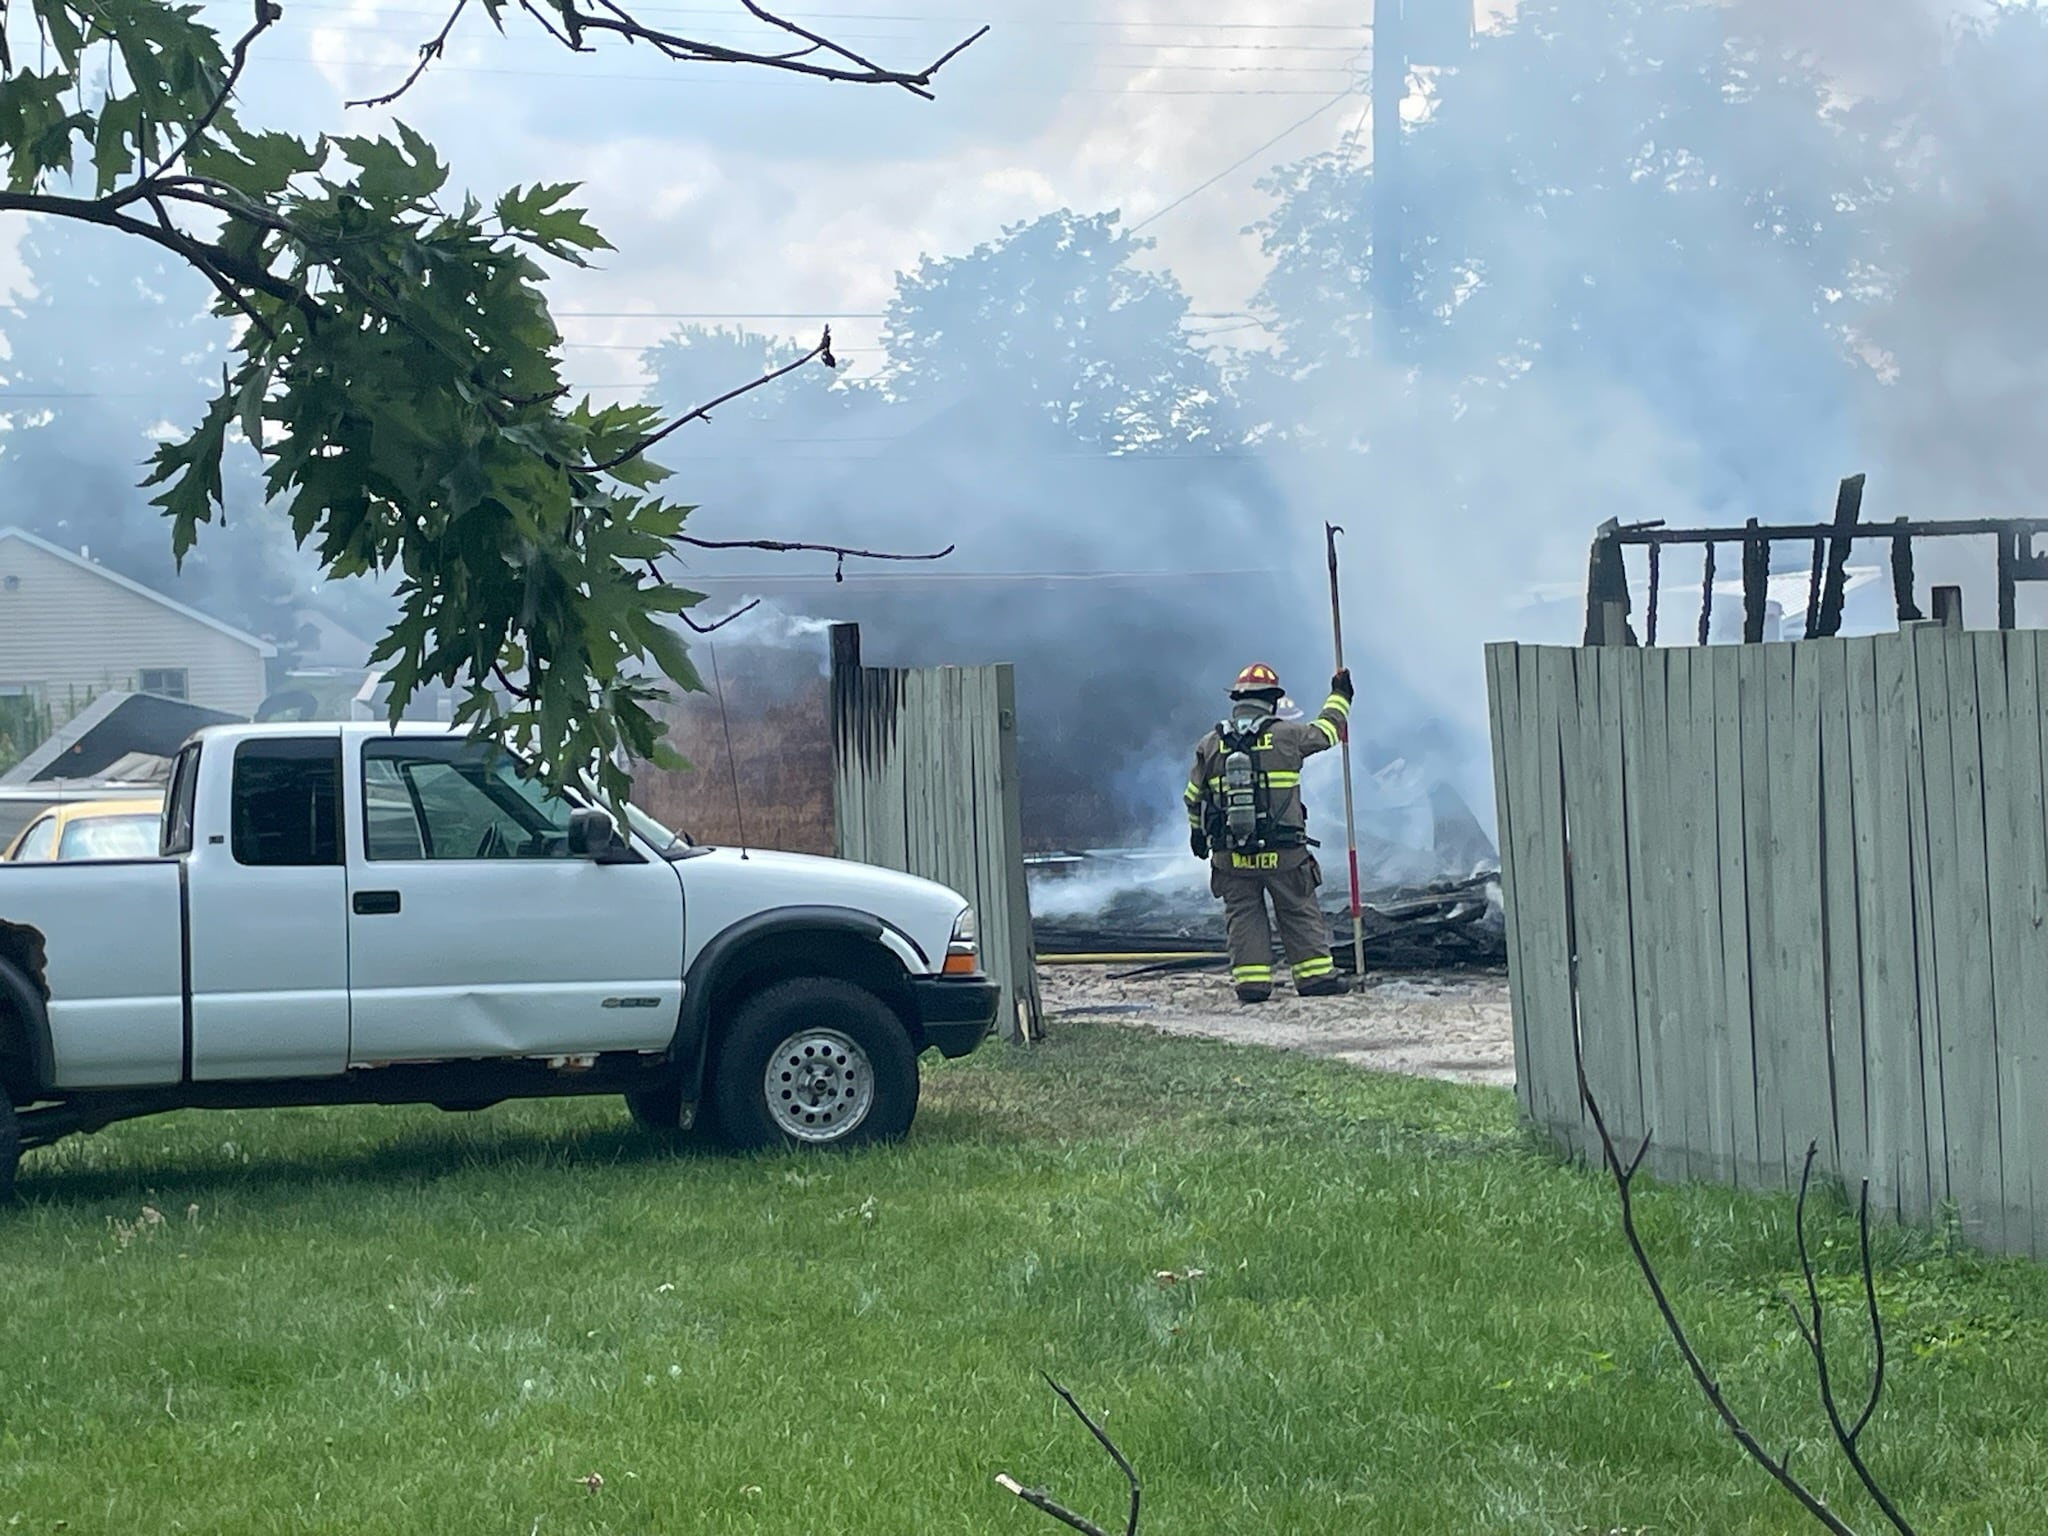 La Salle resident safe after garage fire, but vehicles a total loss